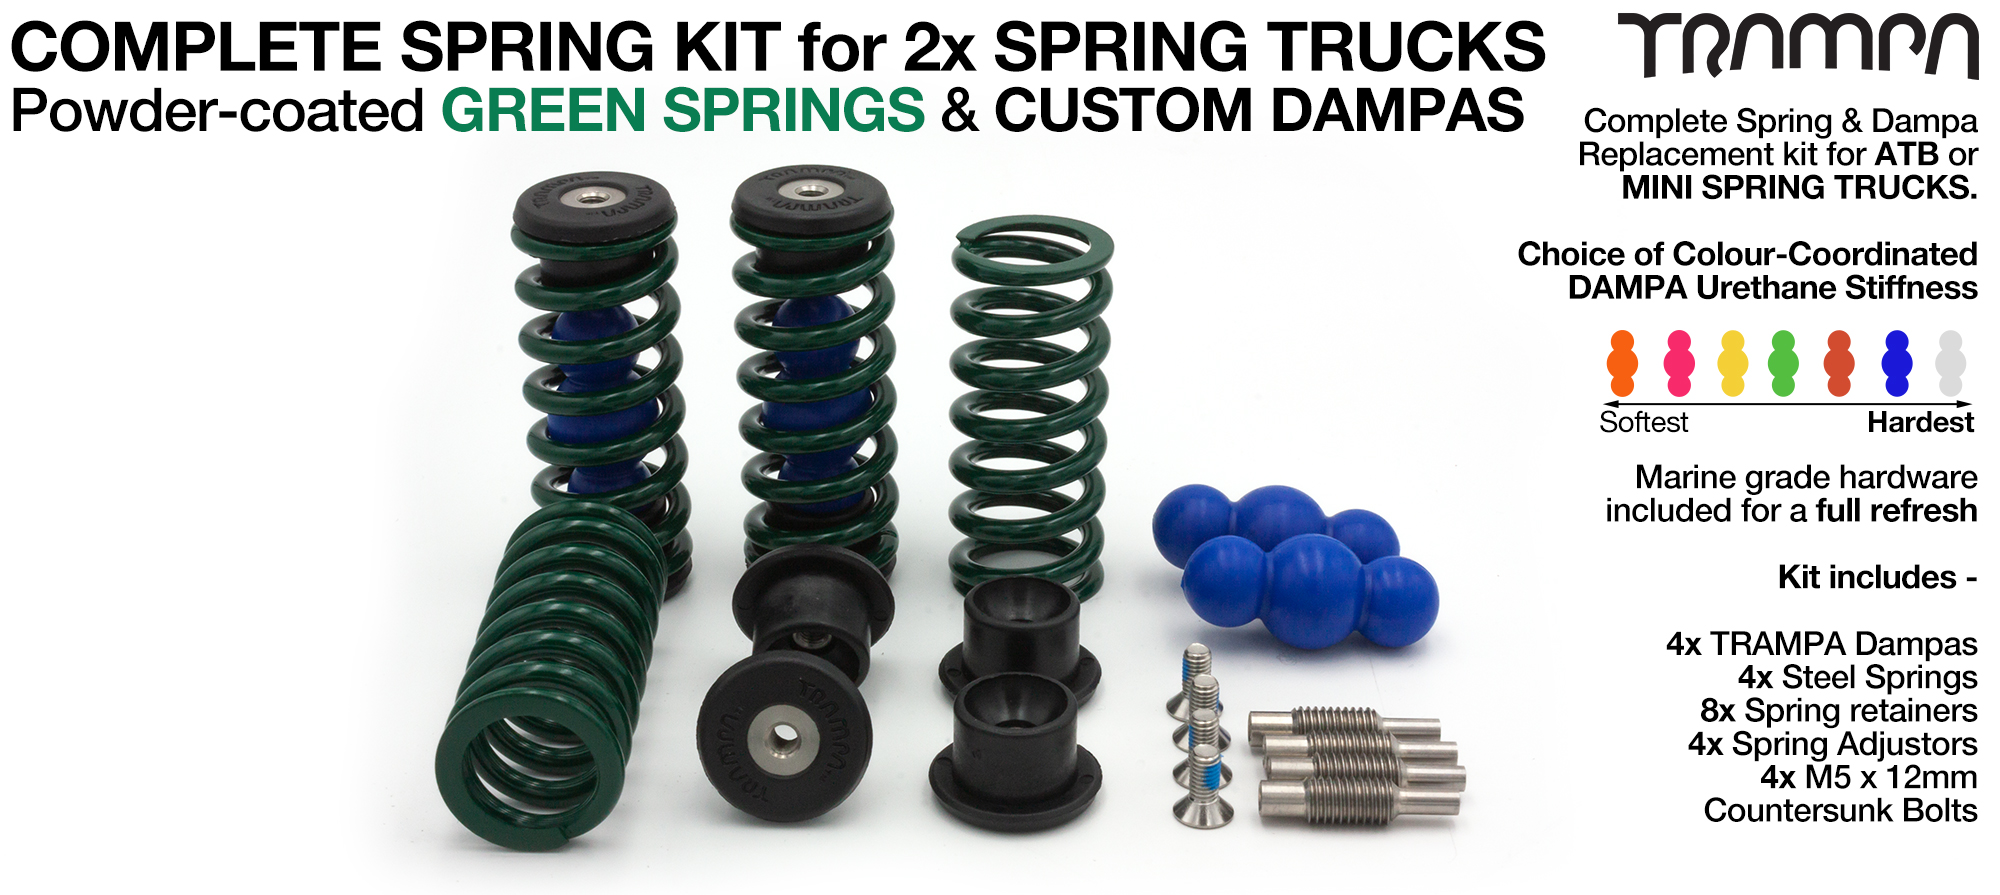 Complete Spring kit for 1x Board = 4x GREEN Springs 4x Dampa 8x Spring Retainers 4x Spring Adjuster & 4 M5x12mm Countersunk Bolt   